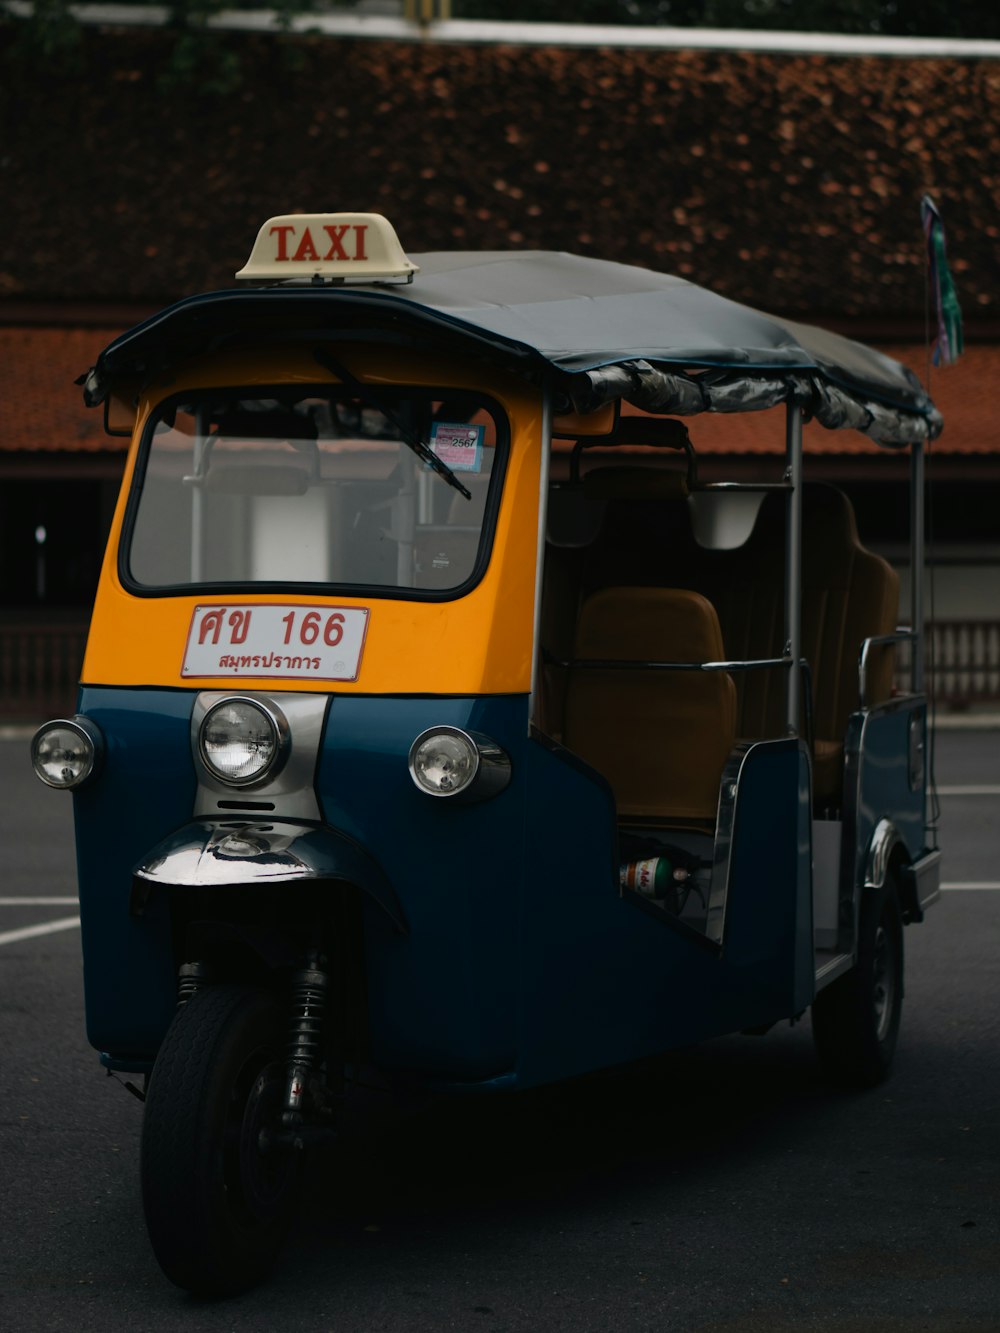 a yellow and blue taxi is parked in a parking lot